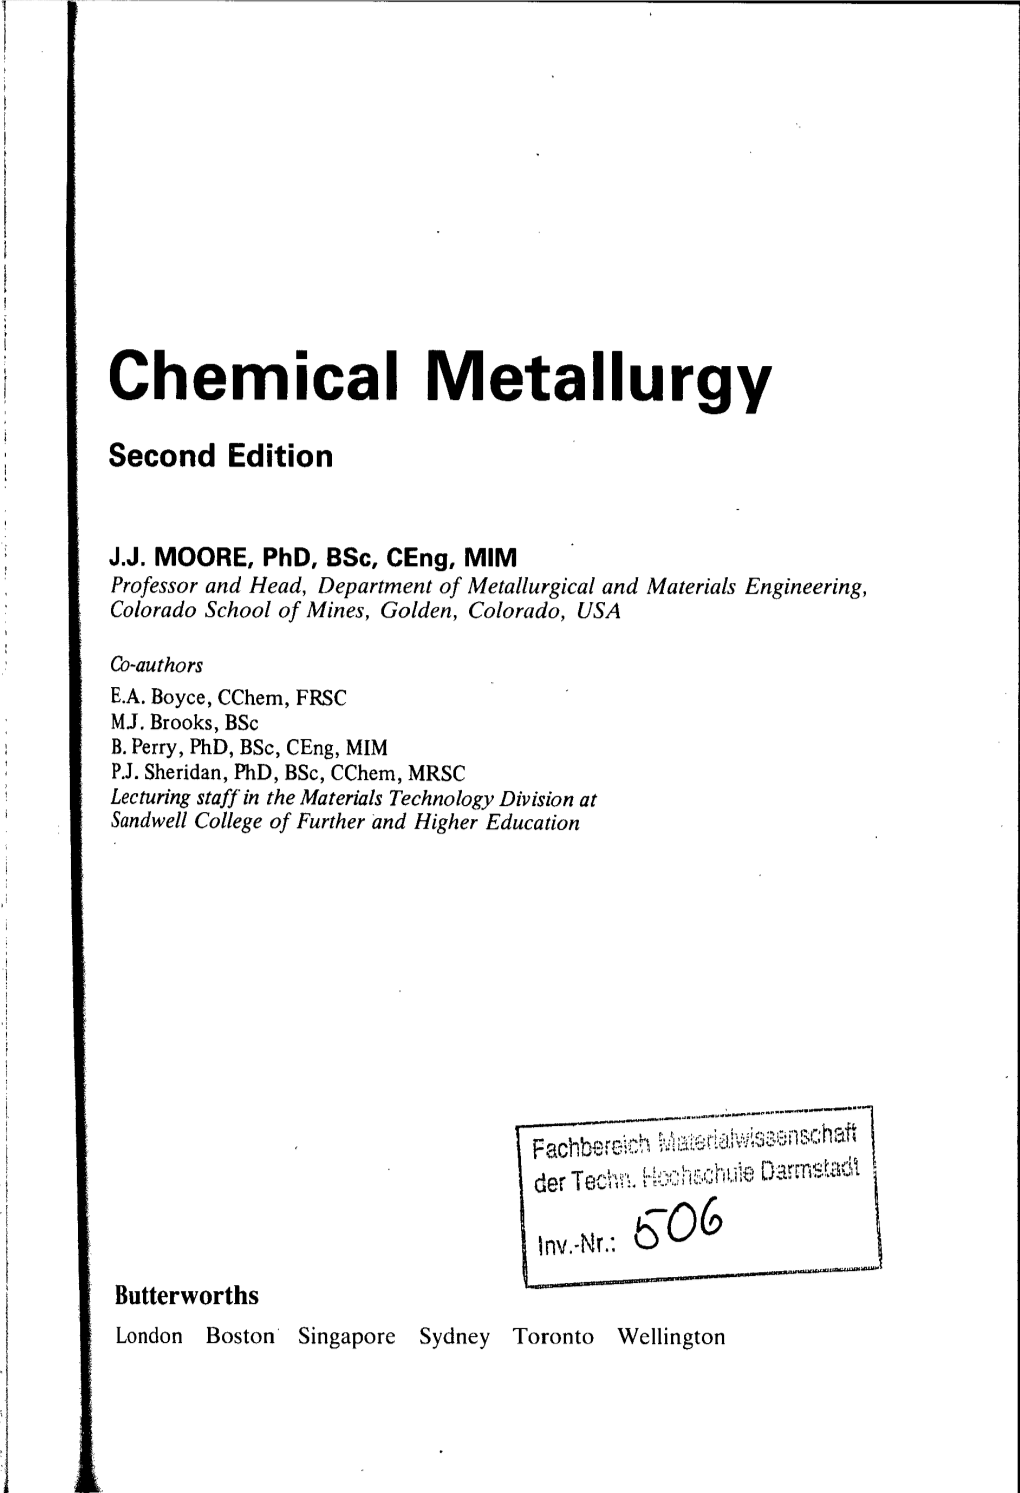 Chemical Metallurgy Second Edition